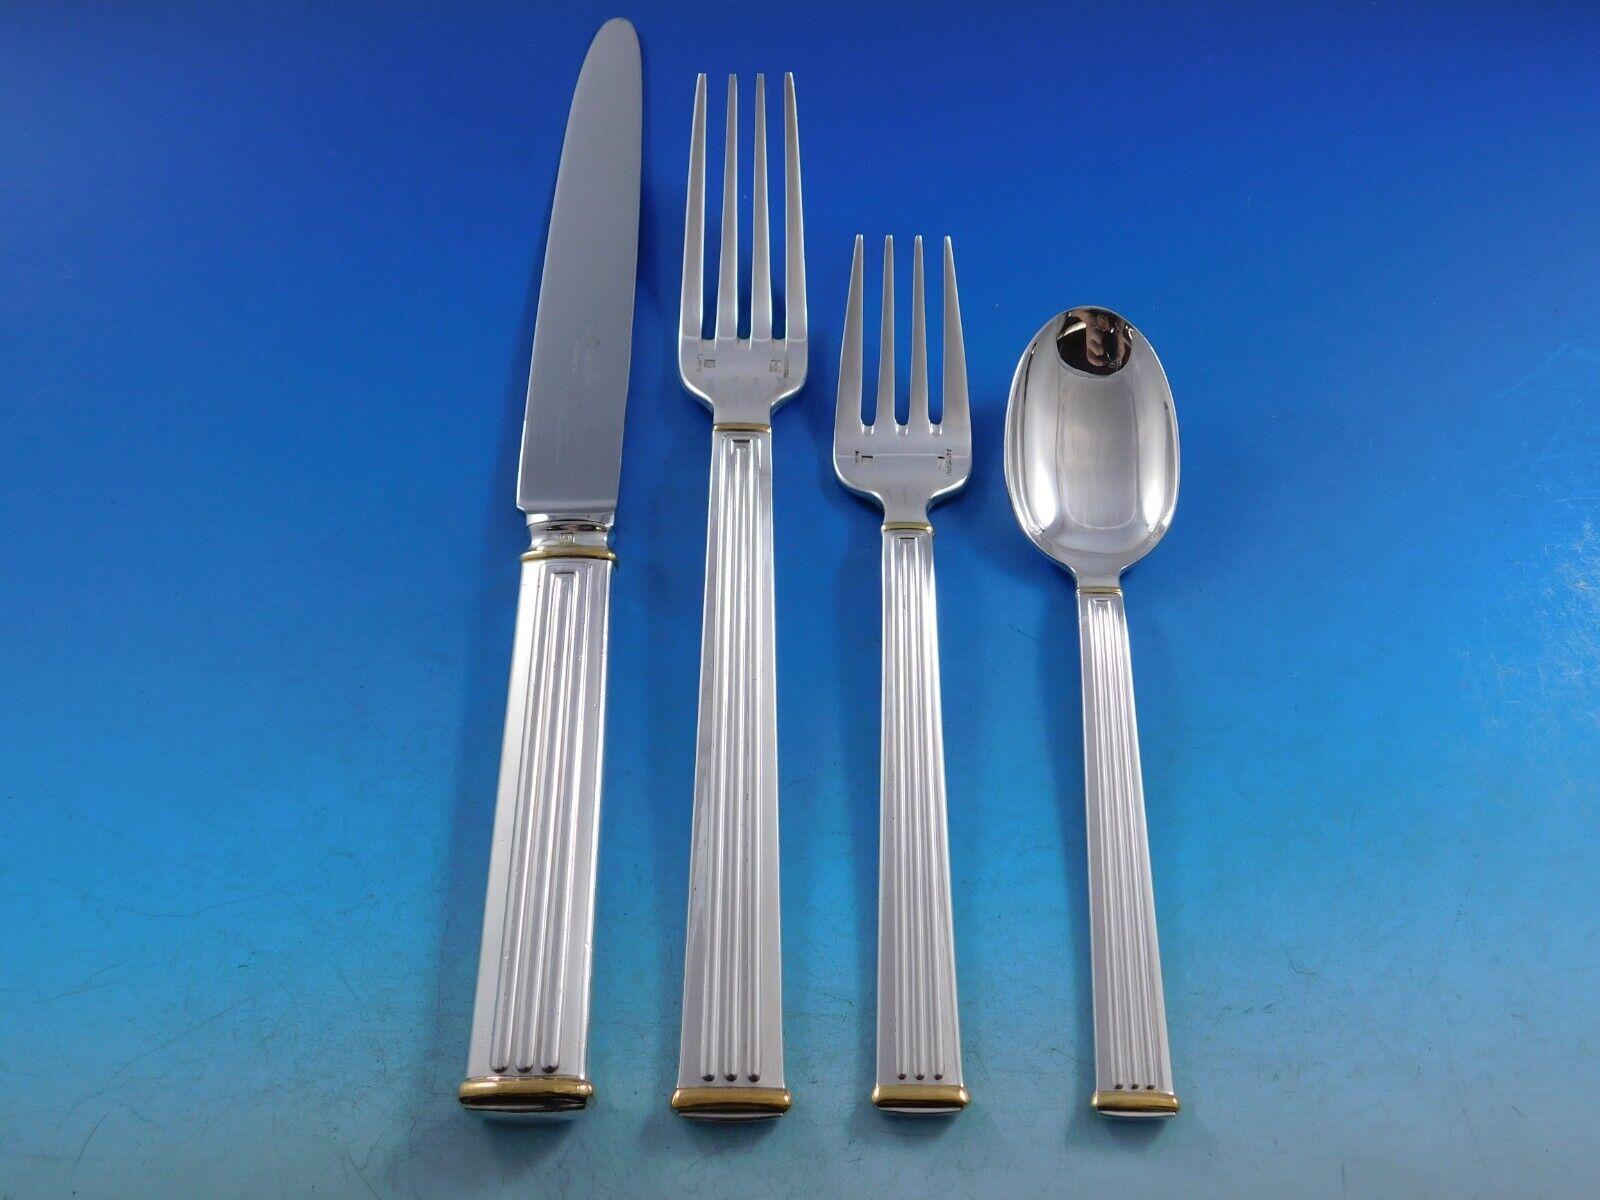 Modern clean lines in a Classic column motif makes this pattern, Triade, forever timeless. 
Monumental Dinner Size Triade Gold Accent by Christofle France Silverplated Flatware set - 162 pieces. This set includes:

12 Dinner Knives, 9 3/4